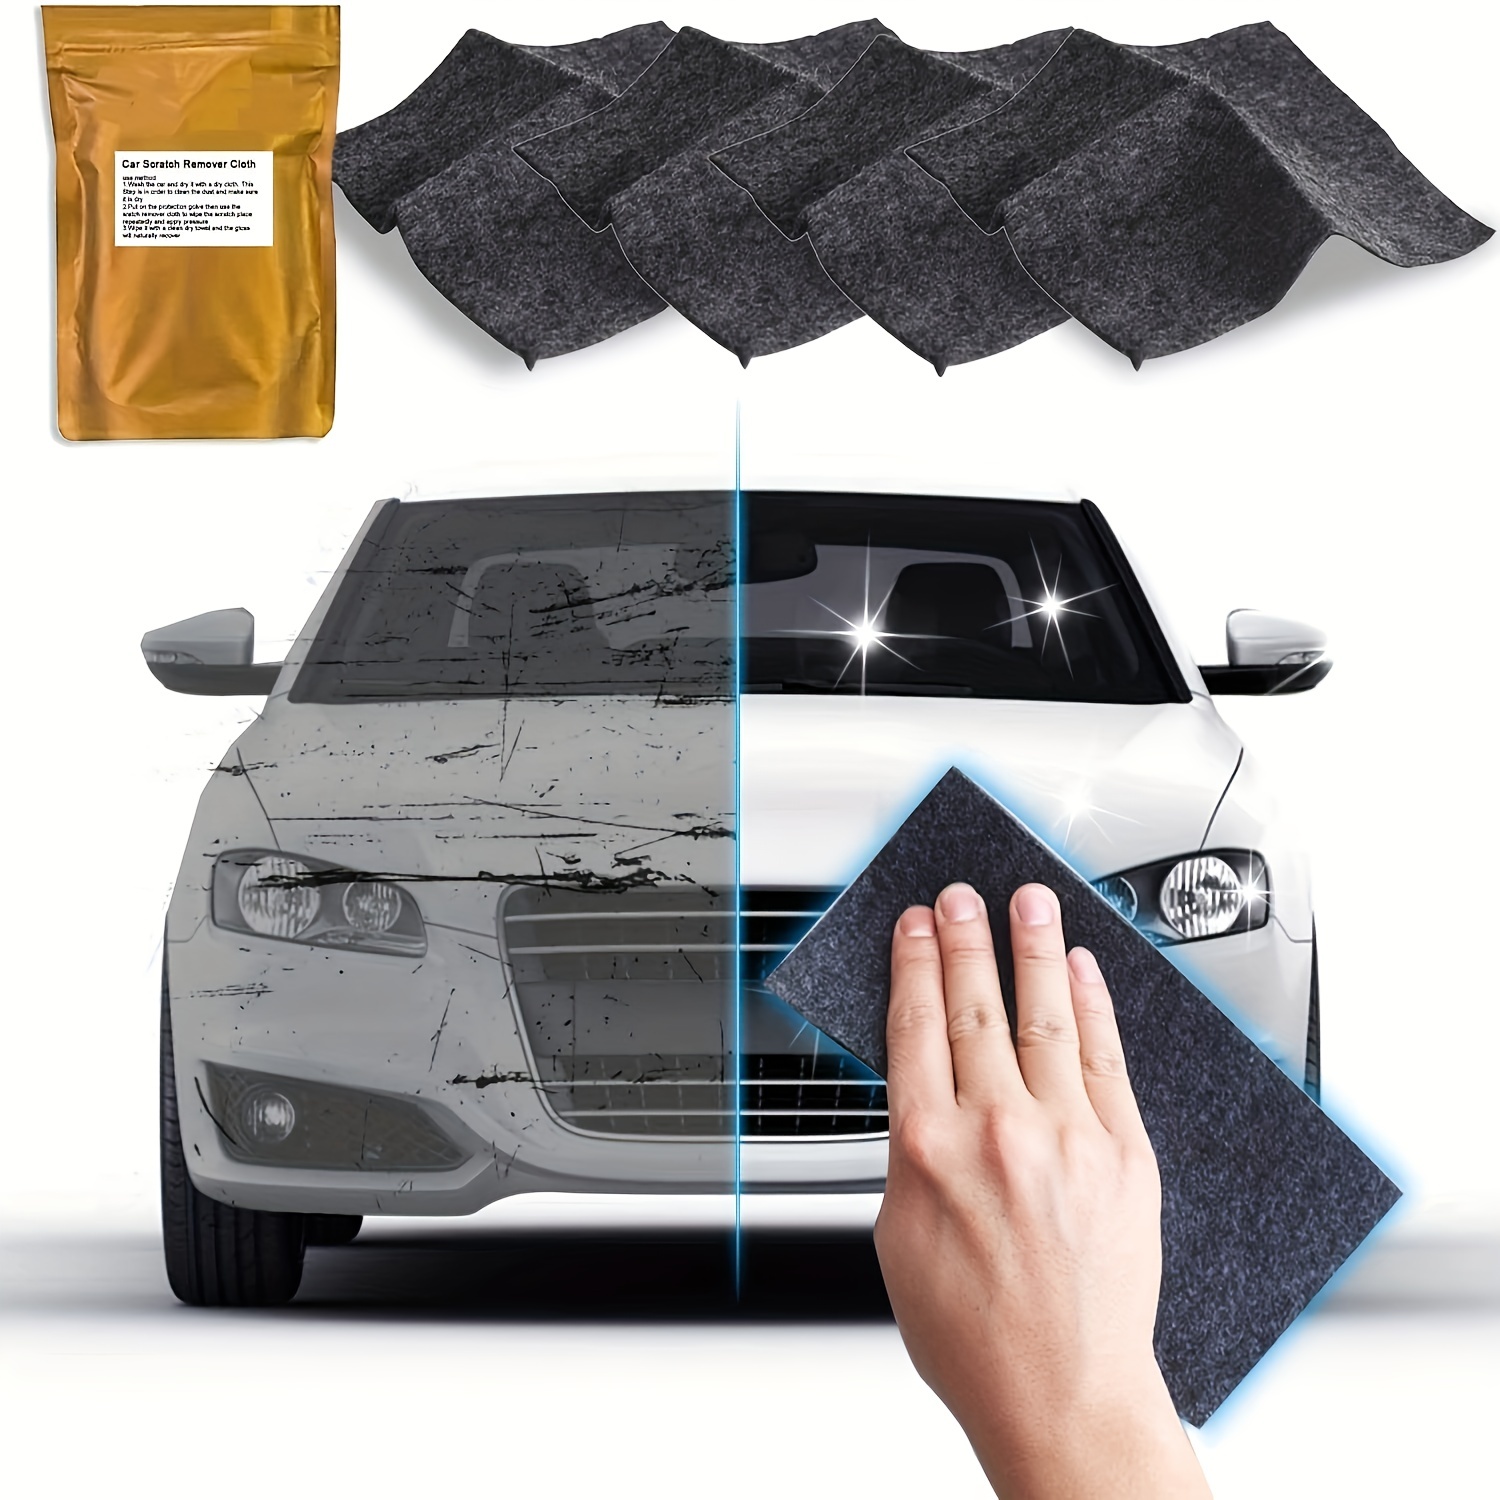  KAZIO Car Scratch Repair Remover, Scratch Remover for Vehicles,  Nano Car Scratch Repair Remover Cloth, Multifunctional Safe Car Scratch  Remover for Glass, Leather, Wood and Metal : Automotive